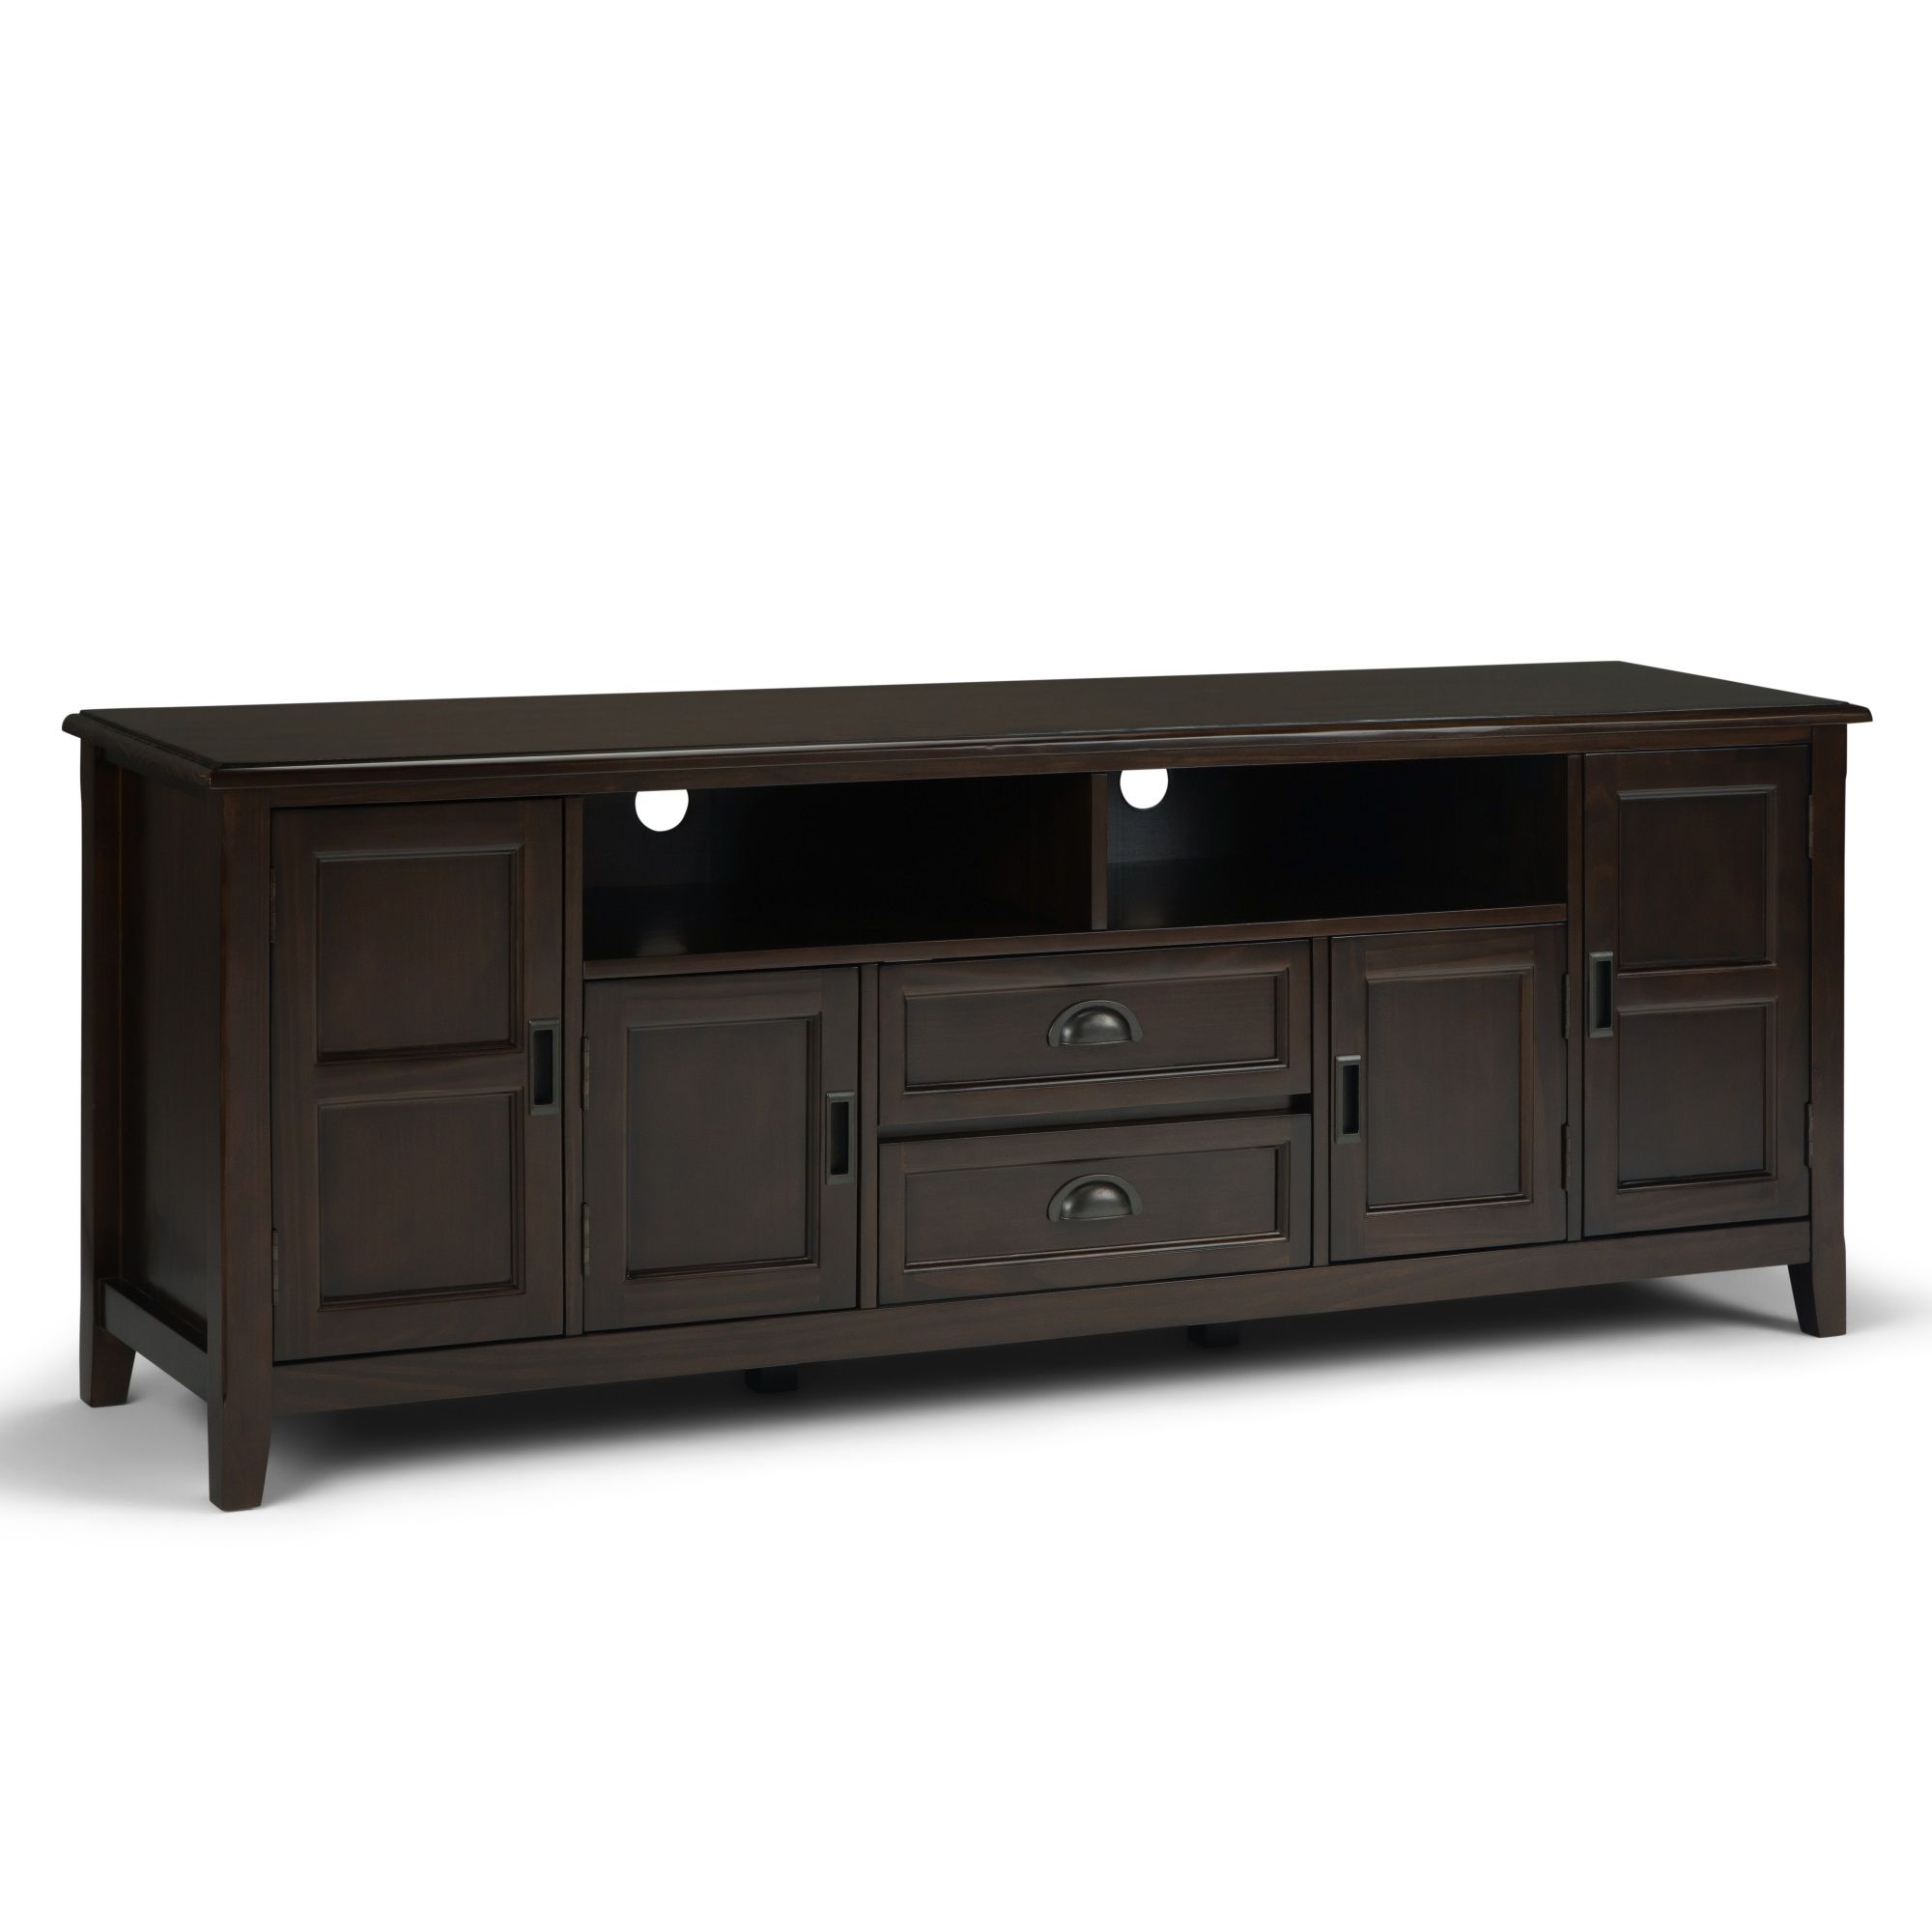 Burlington Solid Wood 72 Inch Tv Media Stand In Mahogany Throughout Tv Media Stands (View 7 of 15)